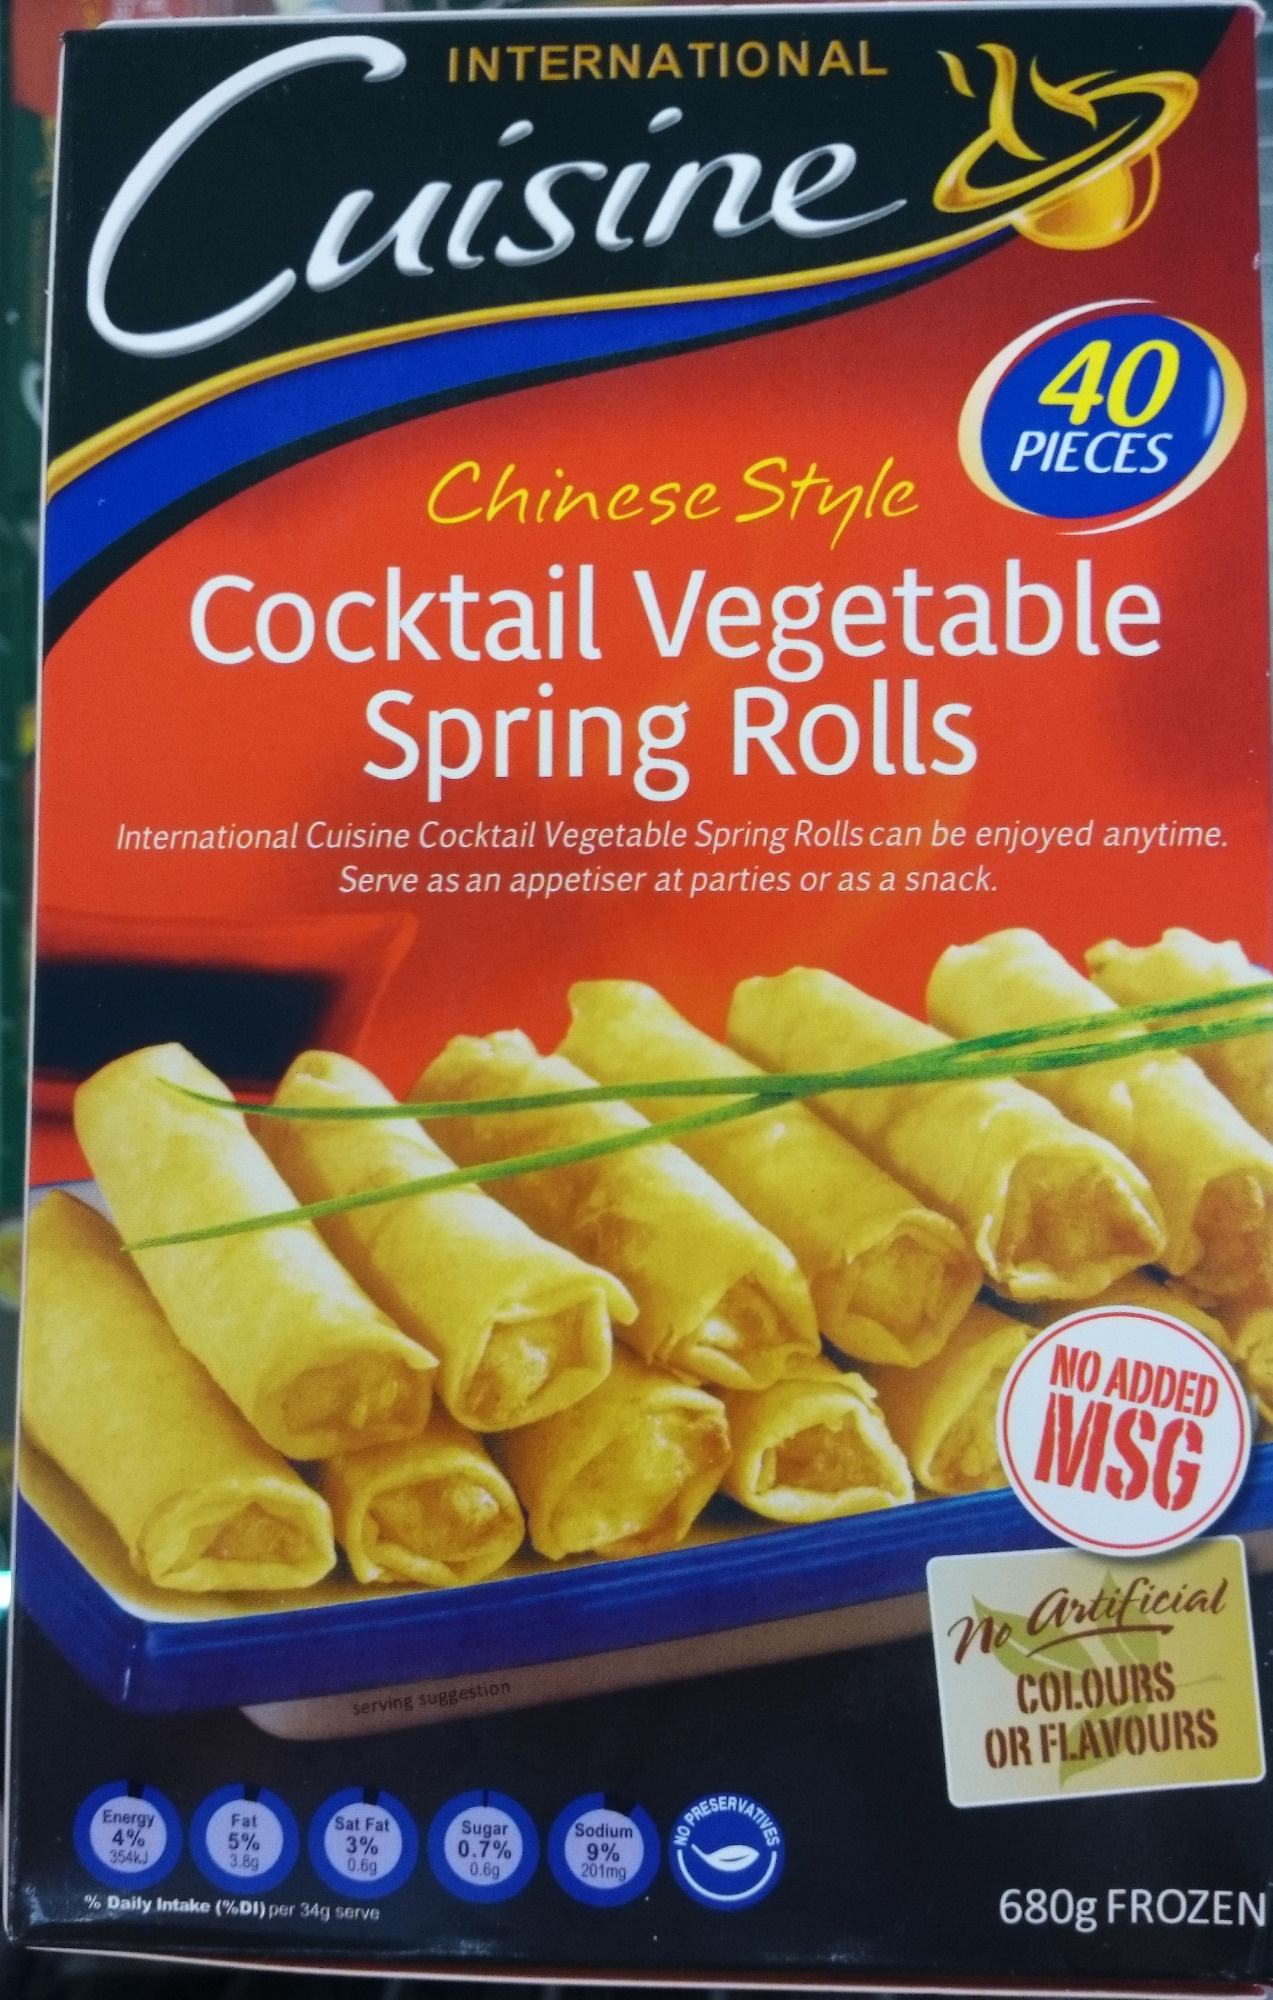 Chinese Style Cocktail Vegetable Spring Rolls - Product